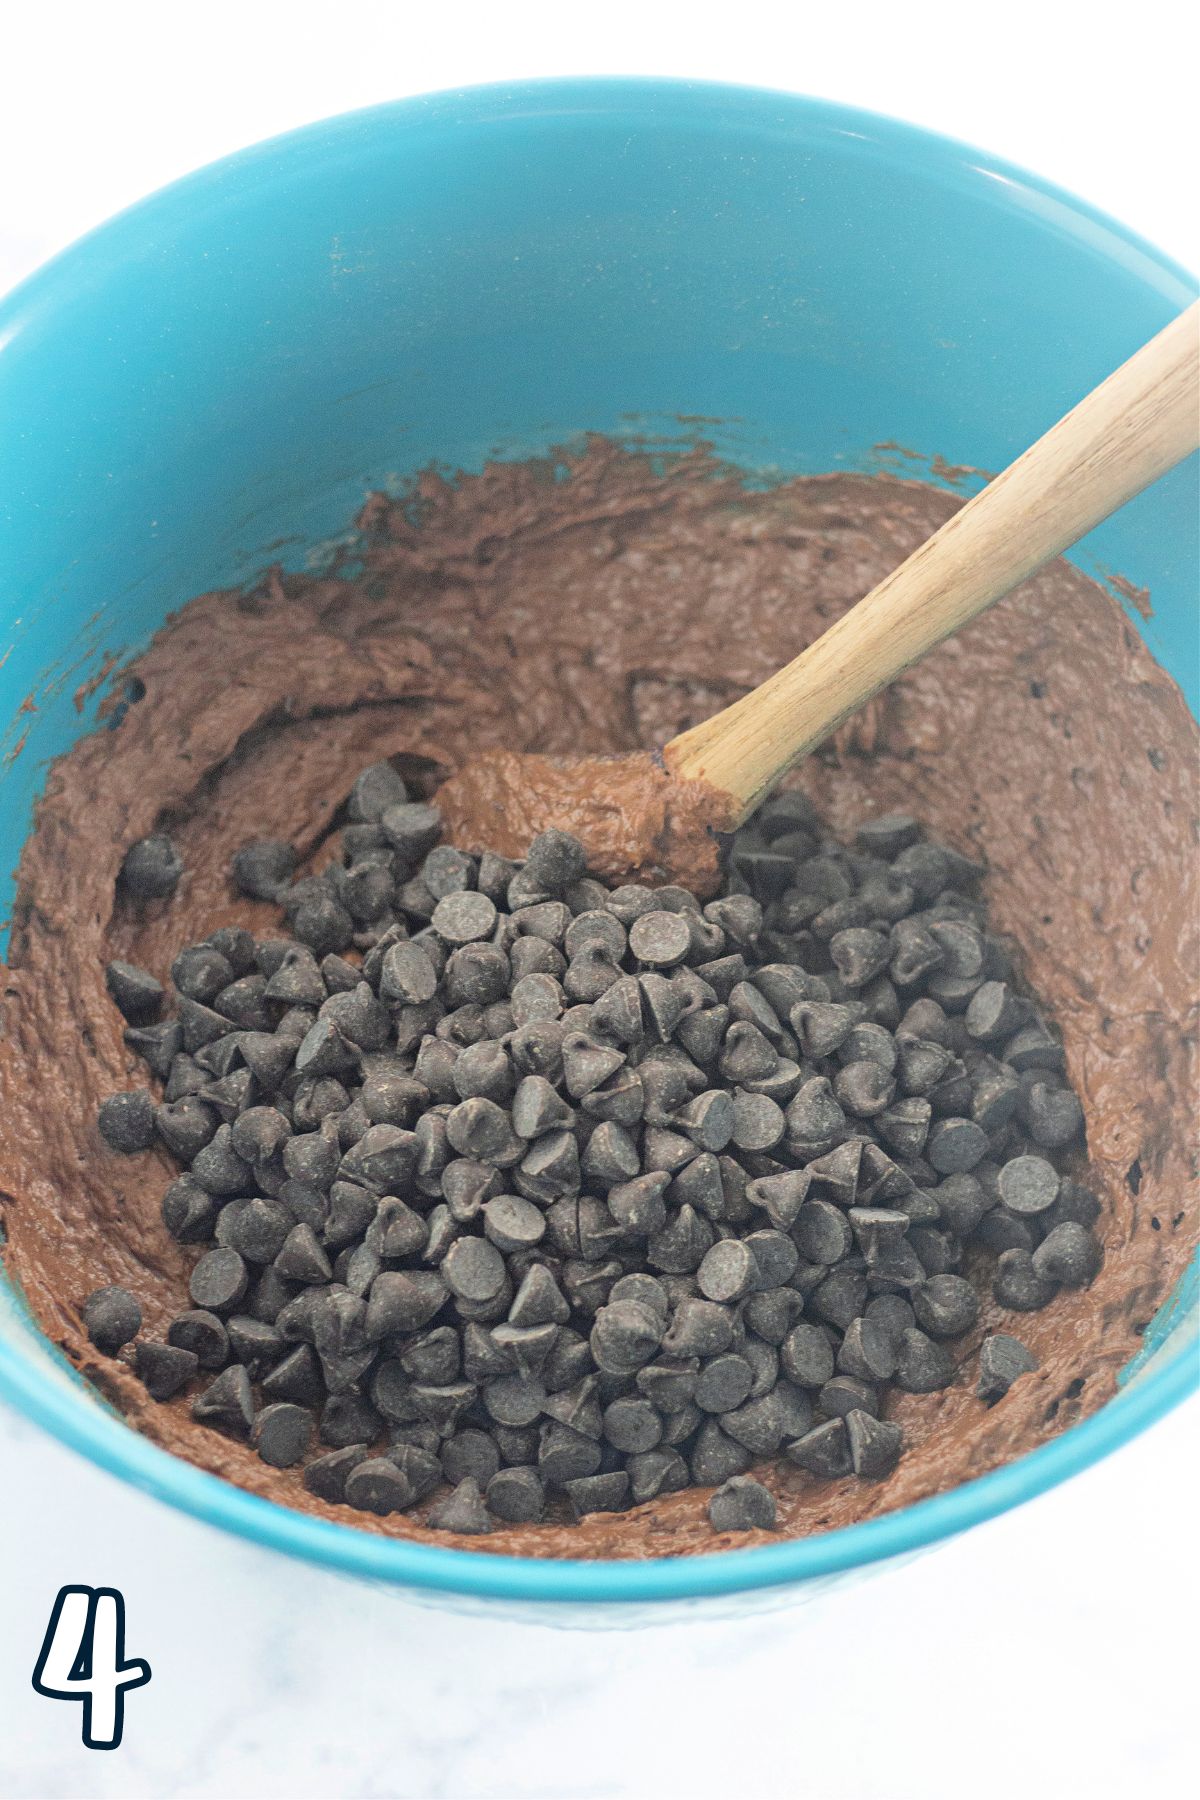 Chocolate banana bread batter and chocolate chips in a blue bowl with a wooden spoon.